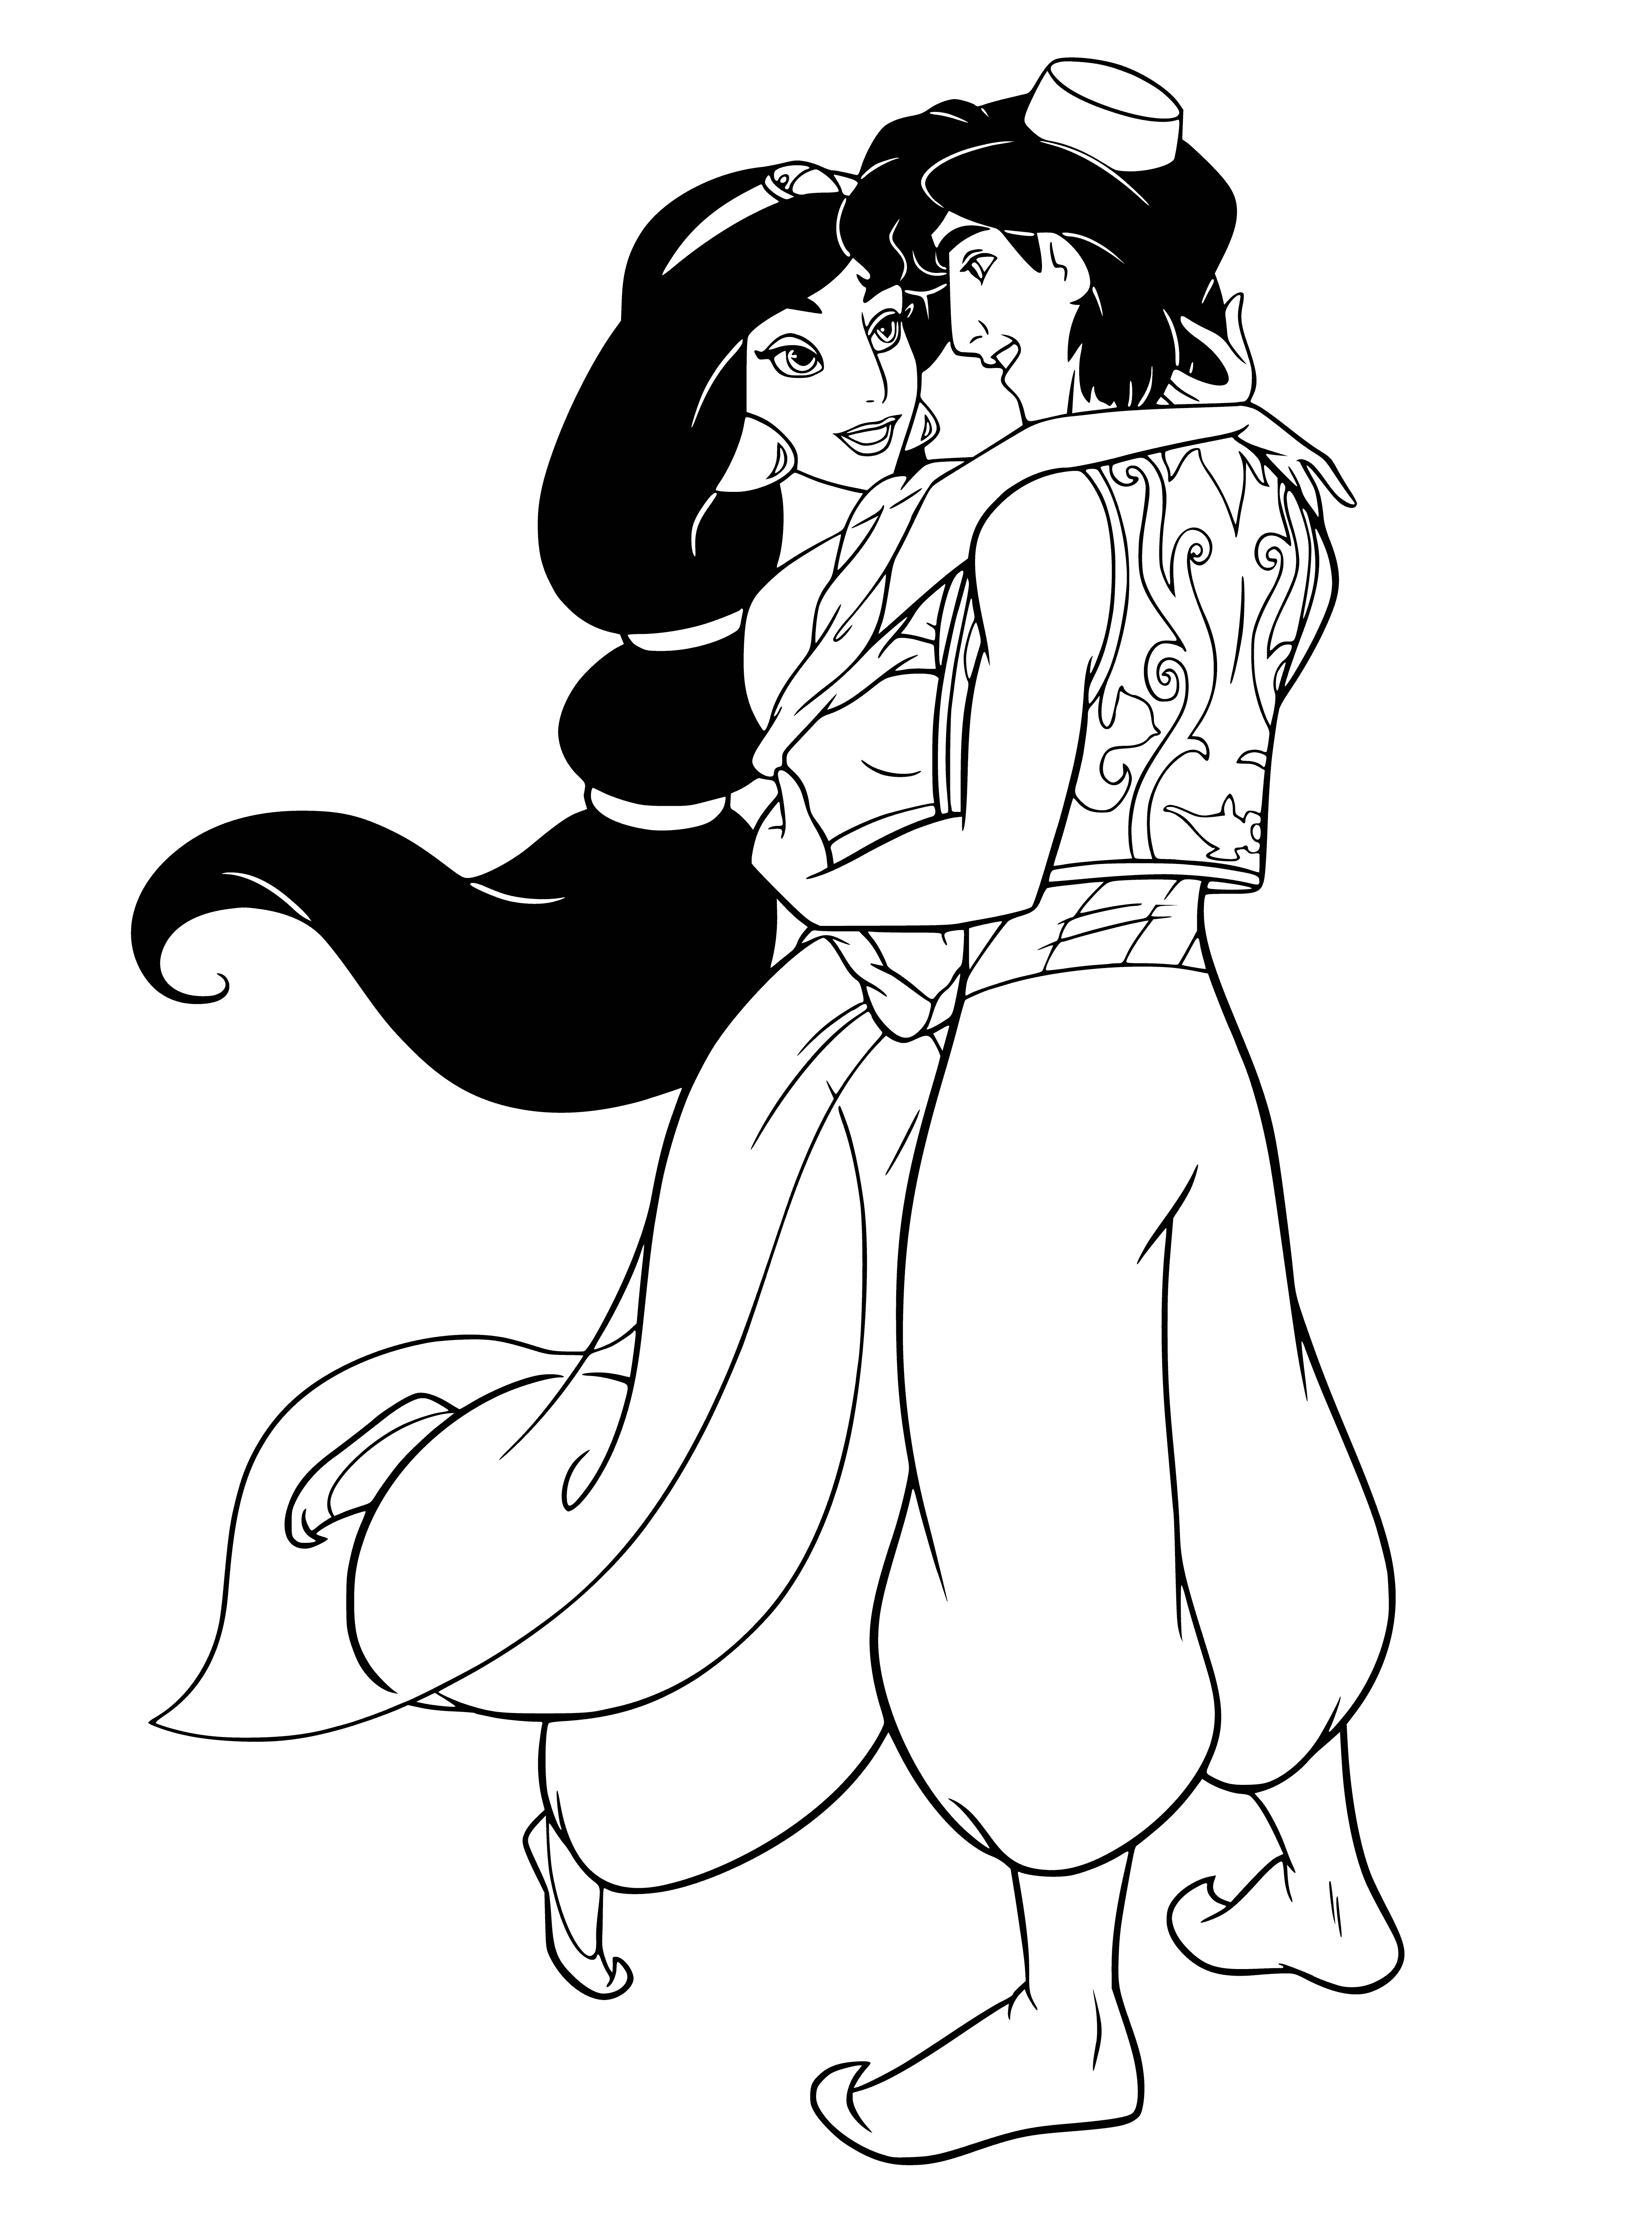 coloring page: Jasmine & Aladdin admire a cityscape together, her in a purple dress & crown and him in an orange shirt & fez, ready with a sword. Both grinning happily.